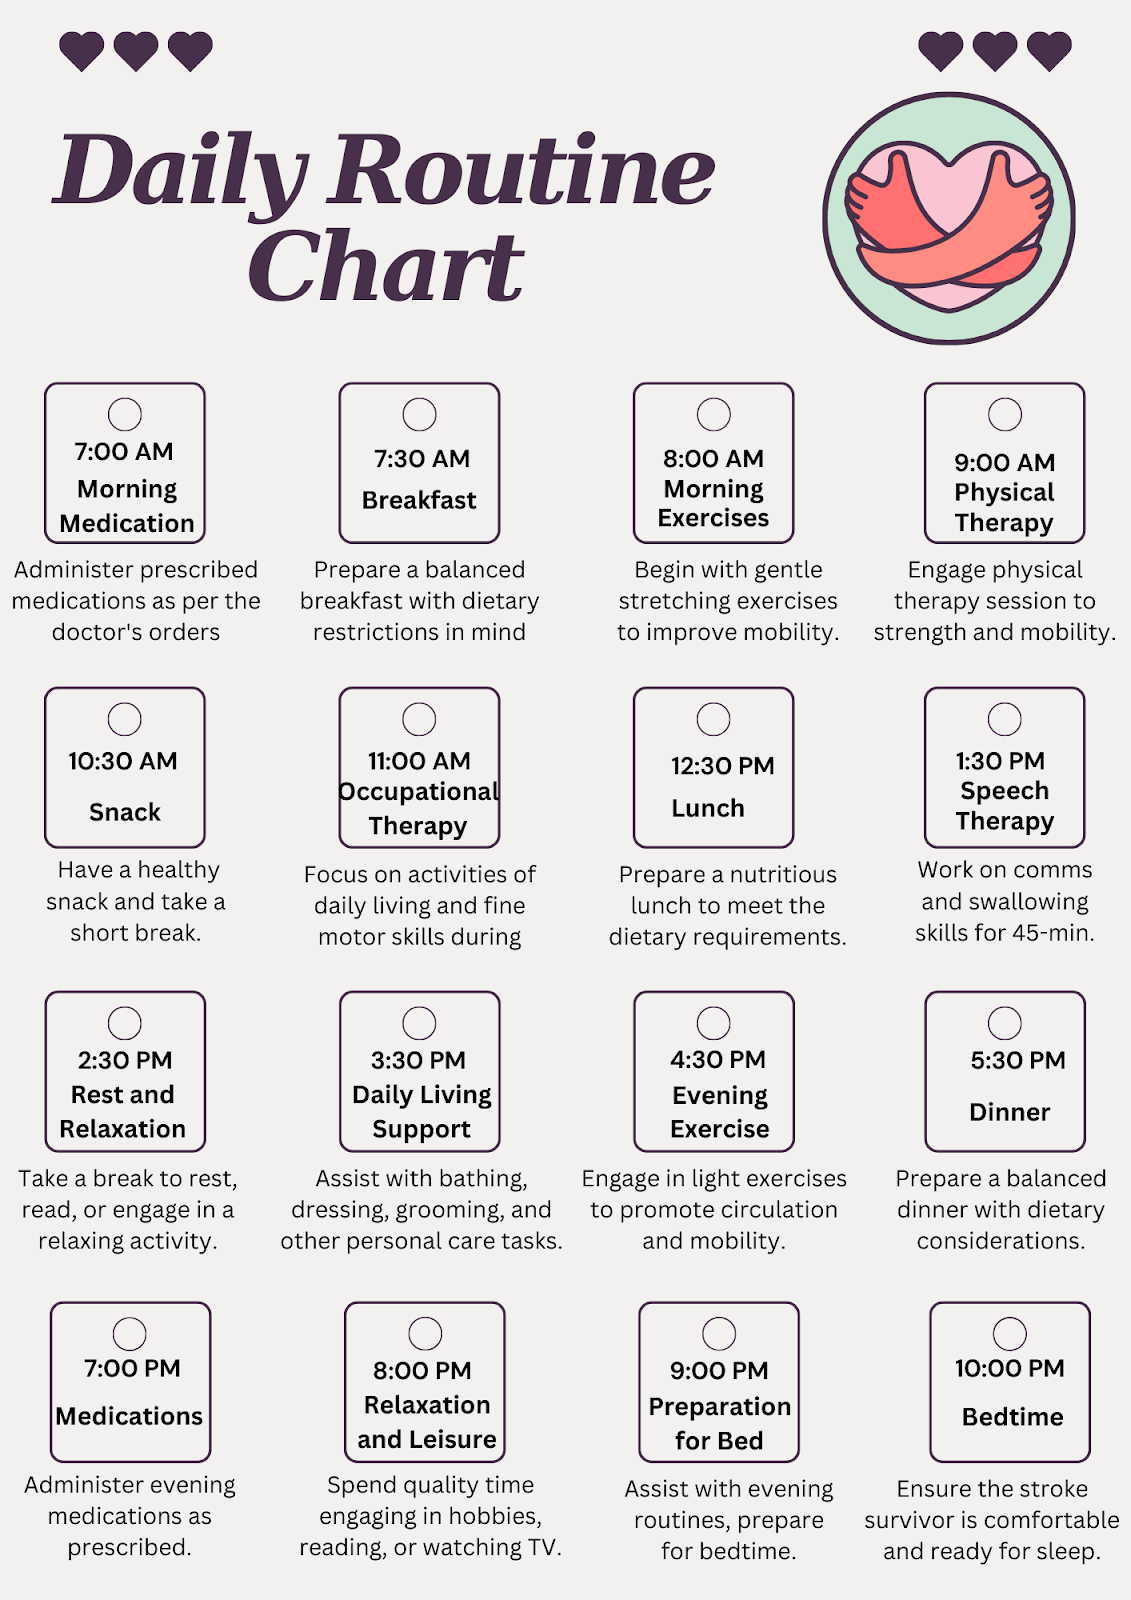 Daily routine chart